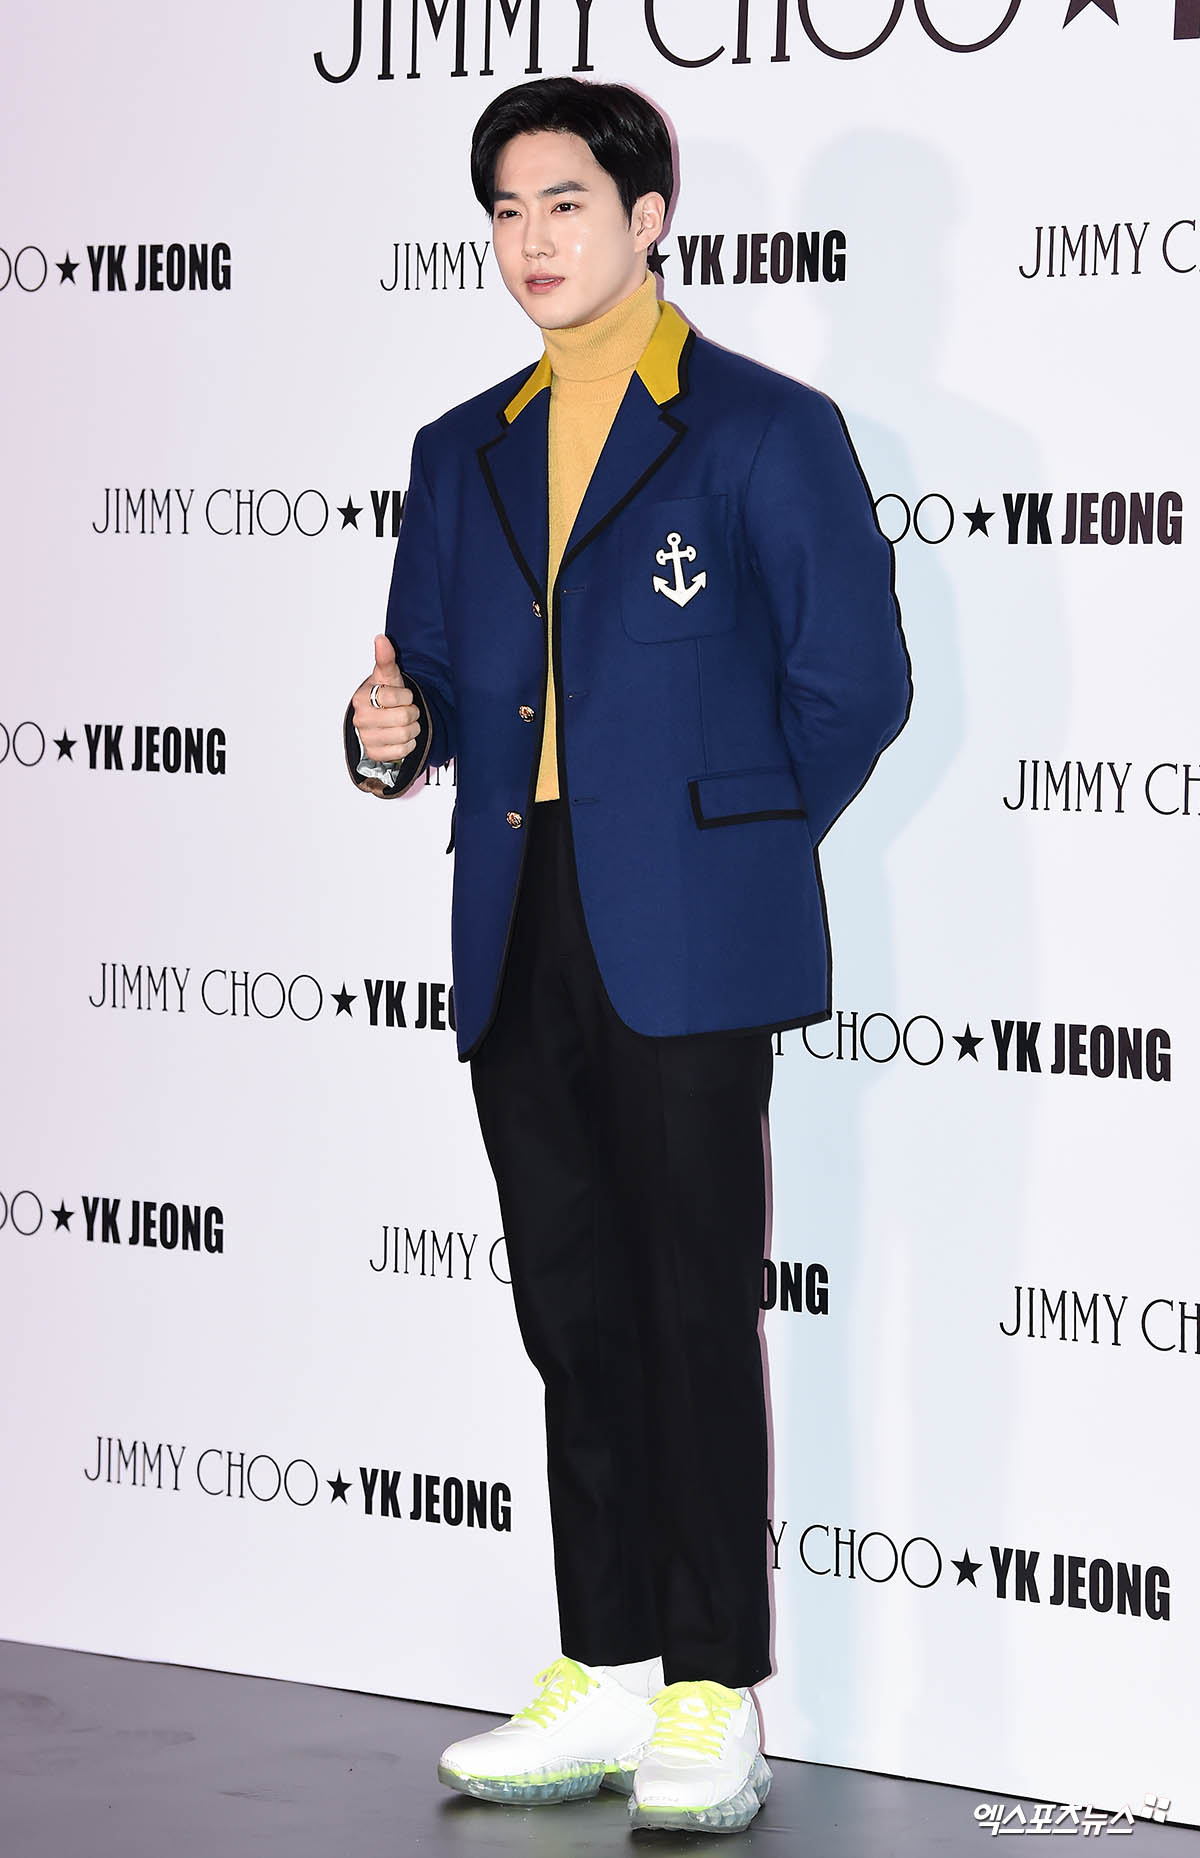 EXO Suho, who attended the event to commemorate the launch of a British luxury accessory brand held at the dress garden in Cheongdam-dong, Seoul, on the afternoon of the 9th day, has photo time.